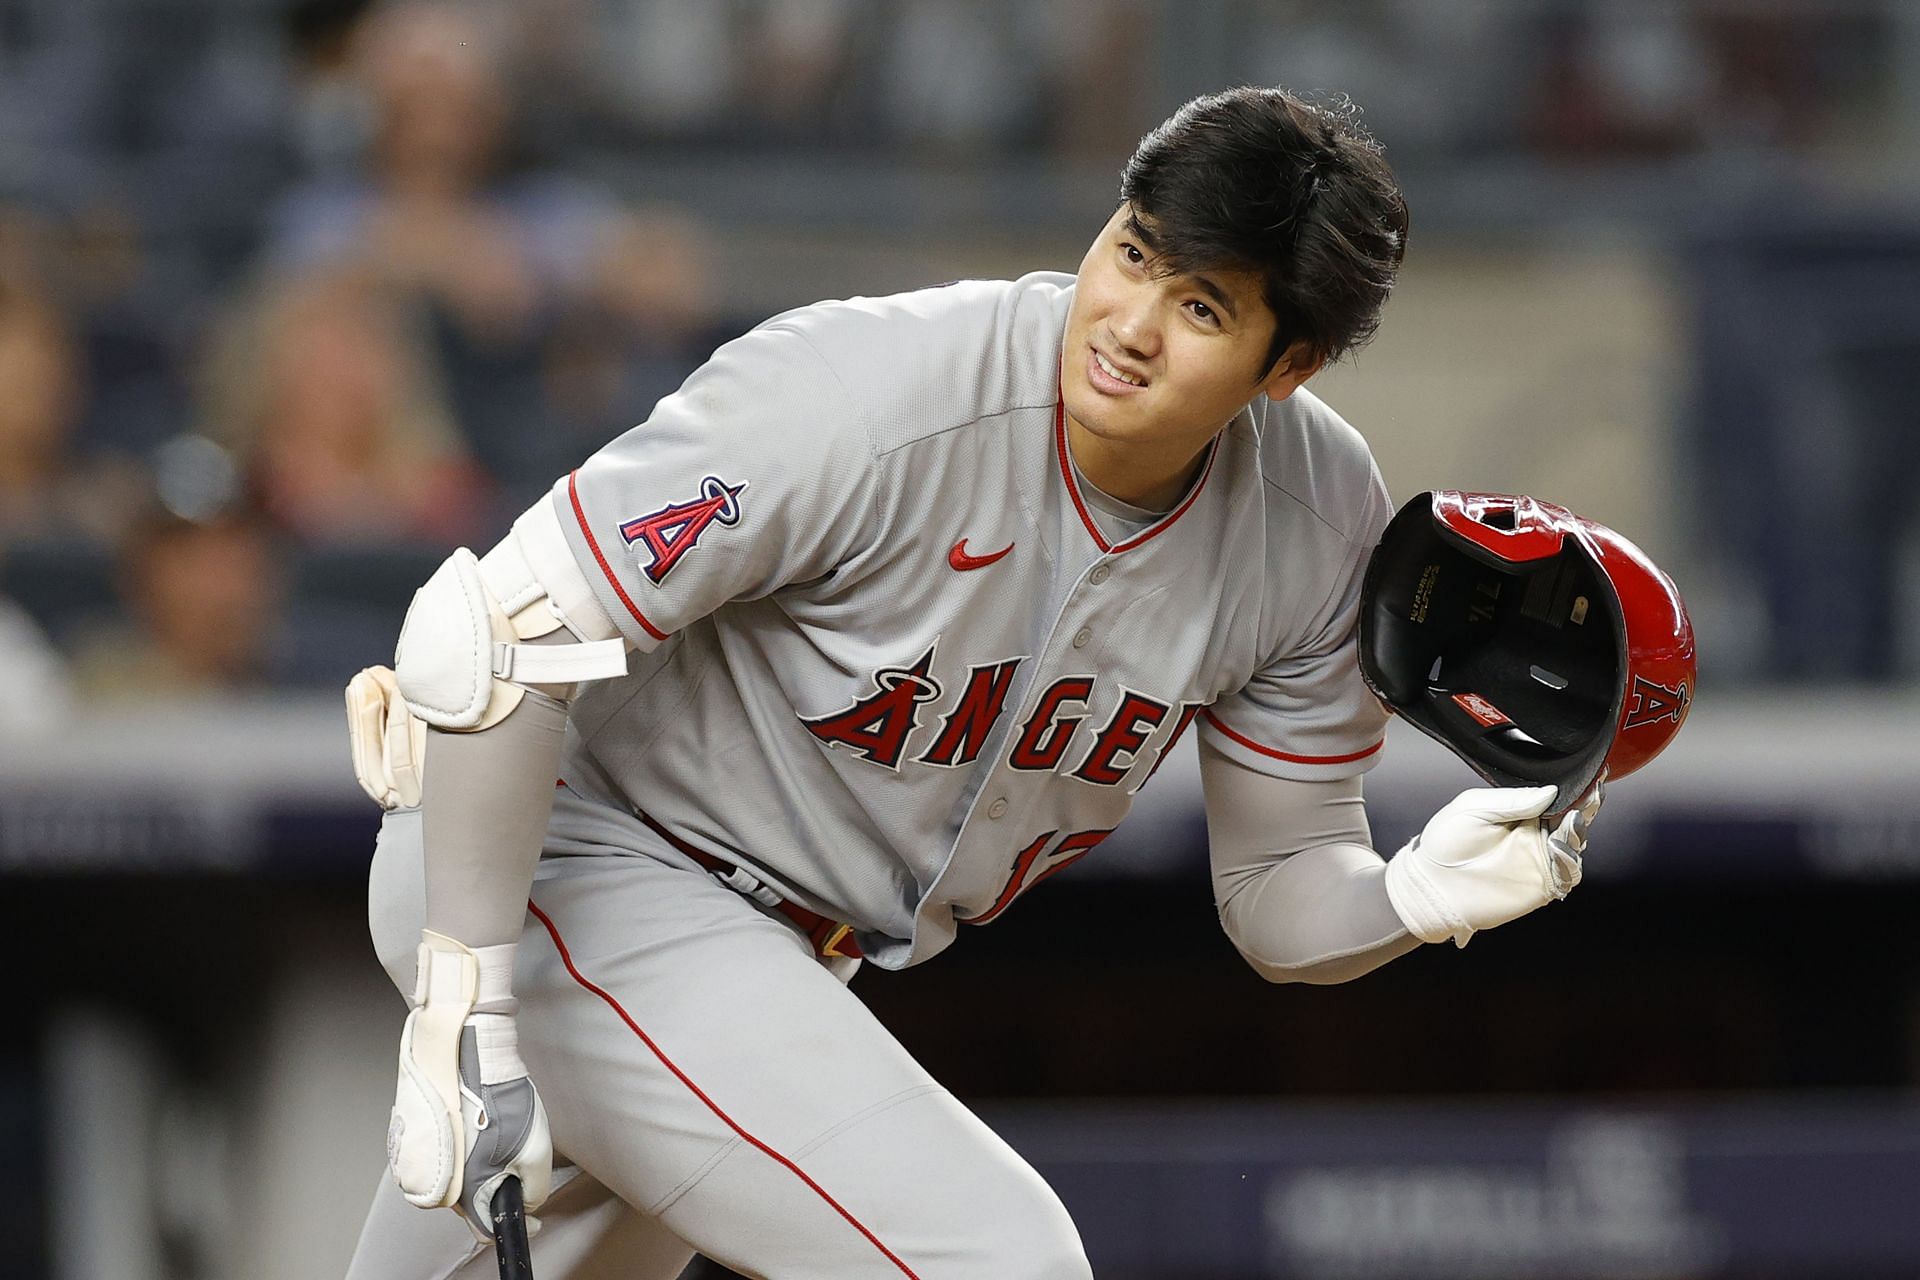 He's a great hitter, one of the best in the game” - New York Yankees  pitcher Nestor Cortes reacts to a hilarious altercation with reigning AL  MVP Shohei Ohtani